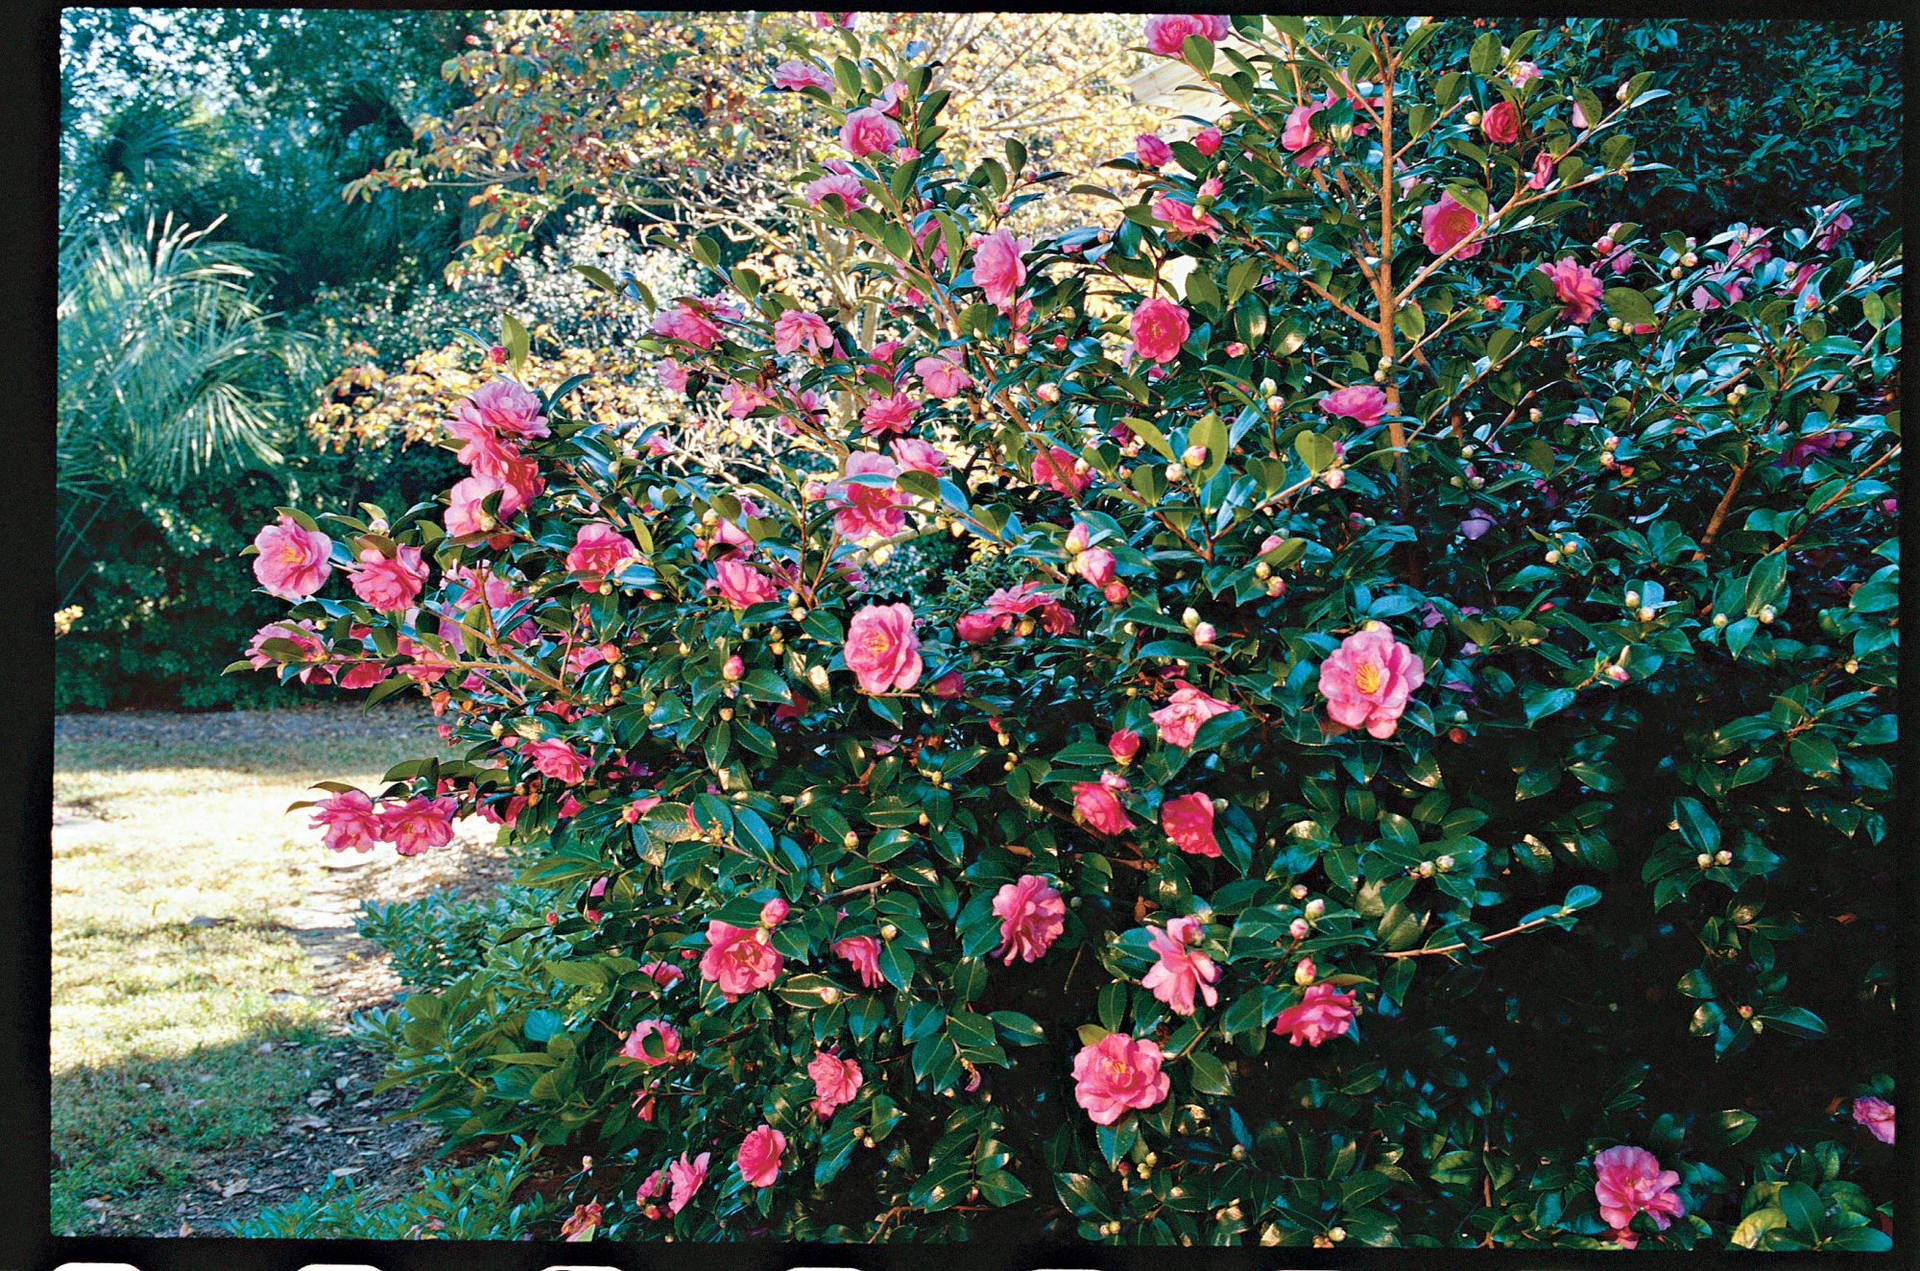 Caption: Vibrant Camellia Sasanqua Blooming In The Garden Background